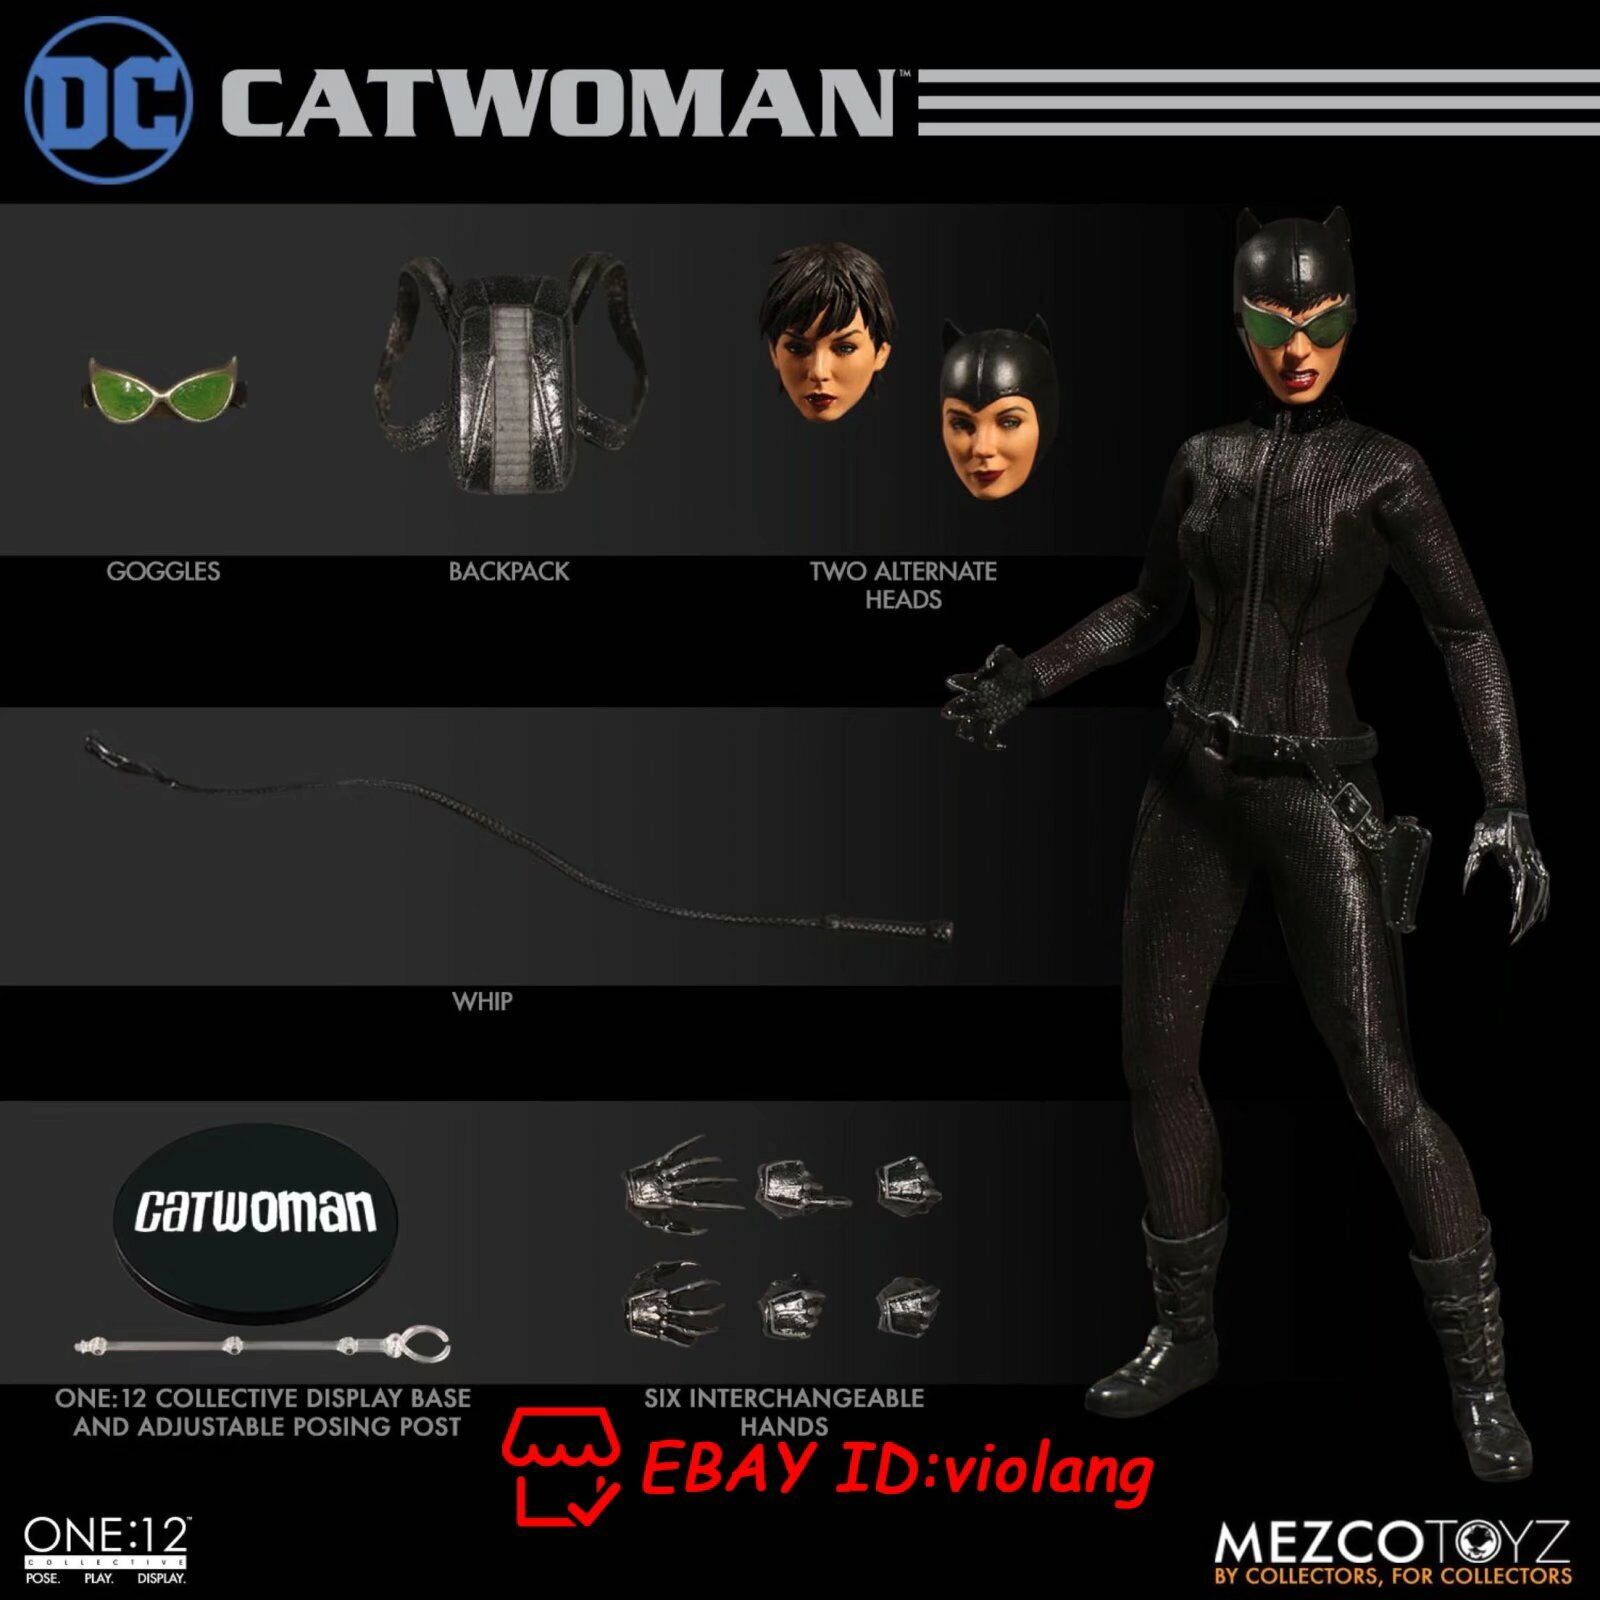 Mezco Toyz One 12 DC Catwoman Collectible Articulated Action Figure In Stock